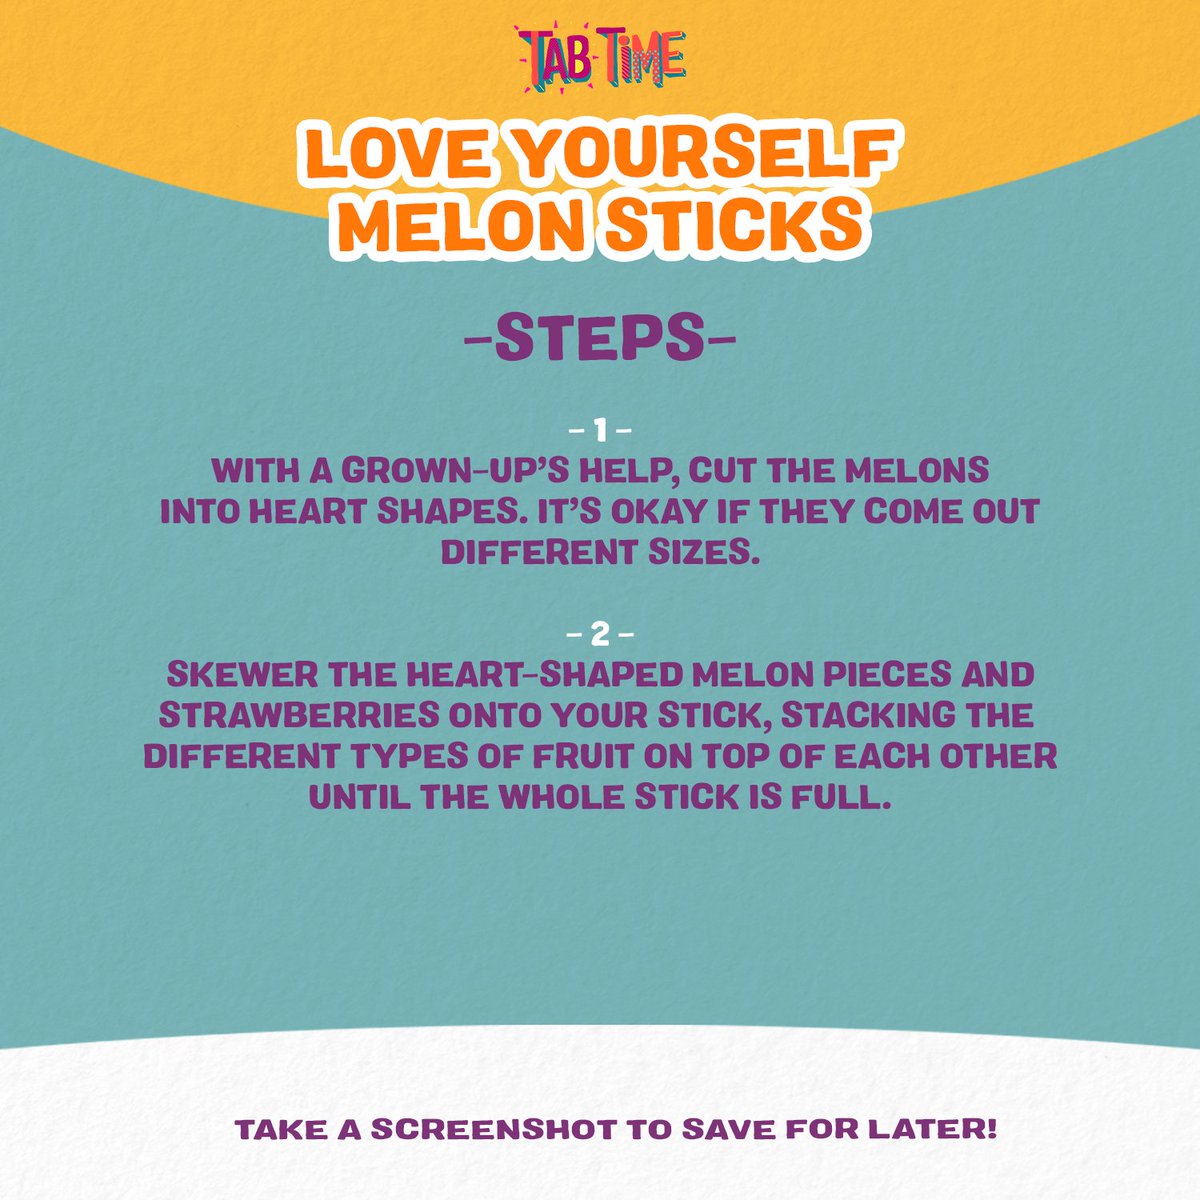 Ms. Tab has a snack you’ll love that’s all about… well, LOVE! 💖 These Love Yourself Melon Sticks are as sweet and easy as giving yourself a hug, or saying something nice about yourself 💚❤️🩷🧡

#healthysnacks #vegansnacks #kidssnacks #snacktime #tabtime #tabithabrown